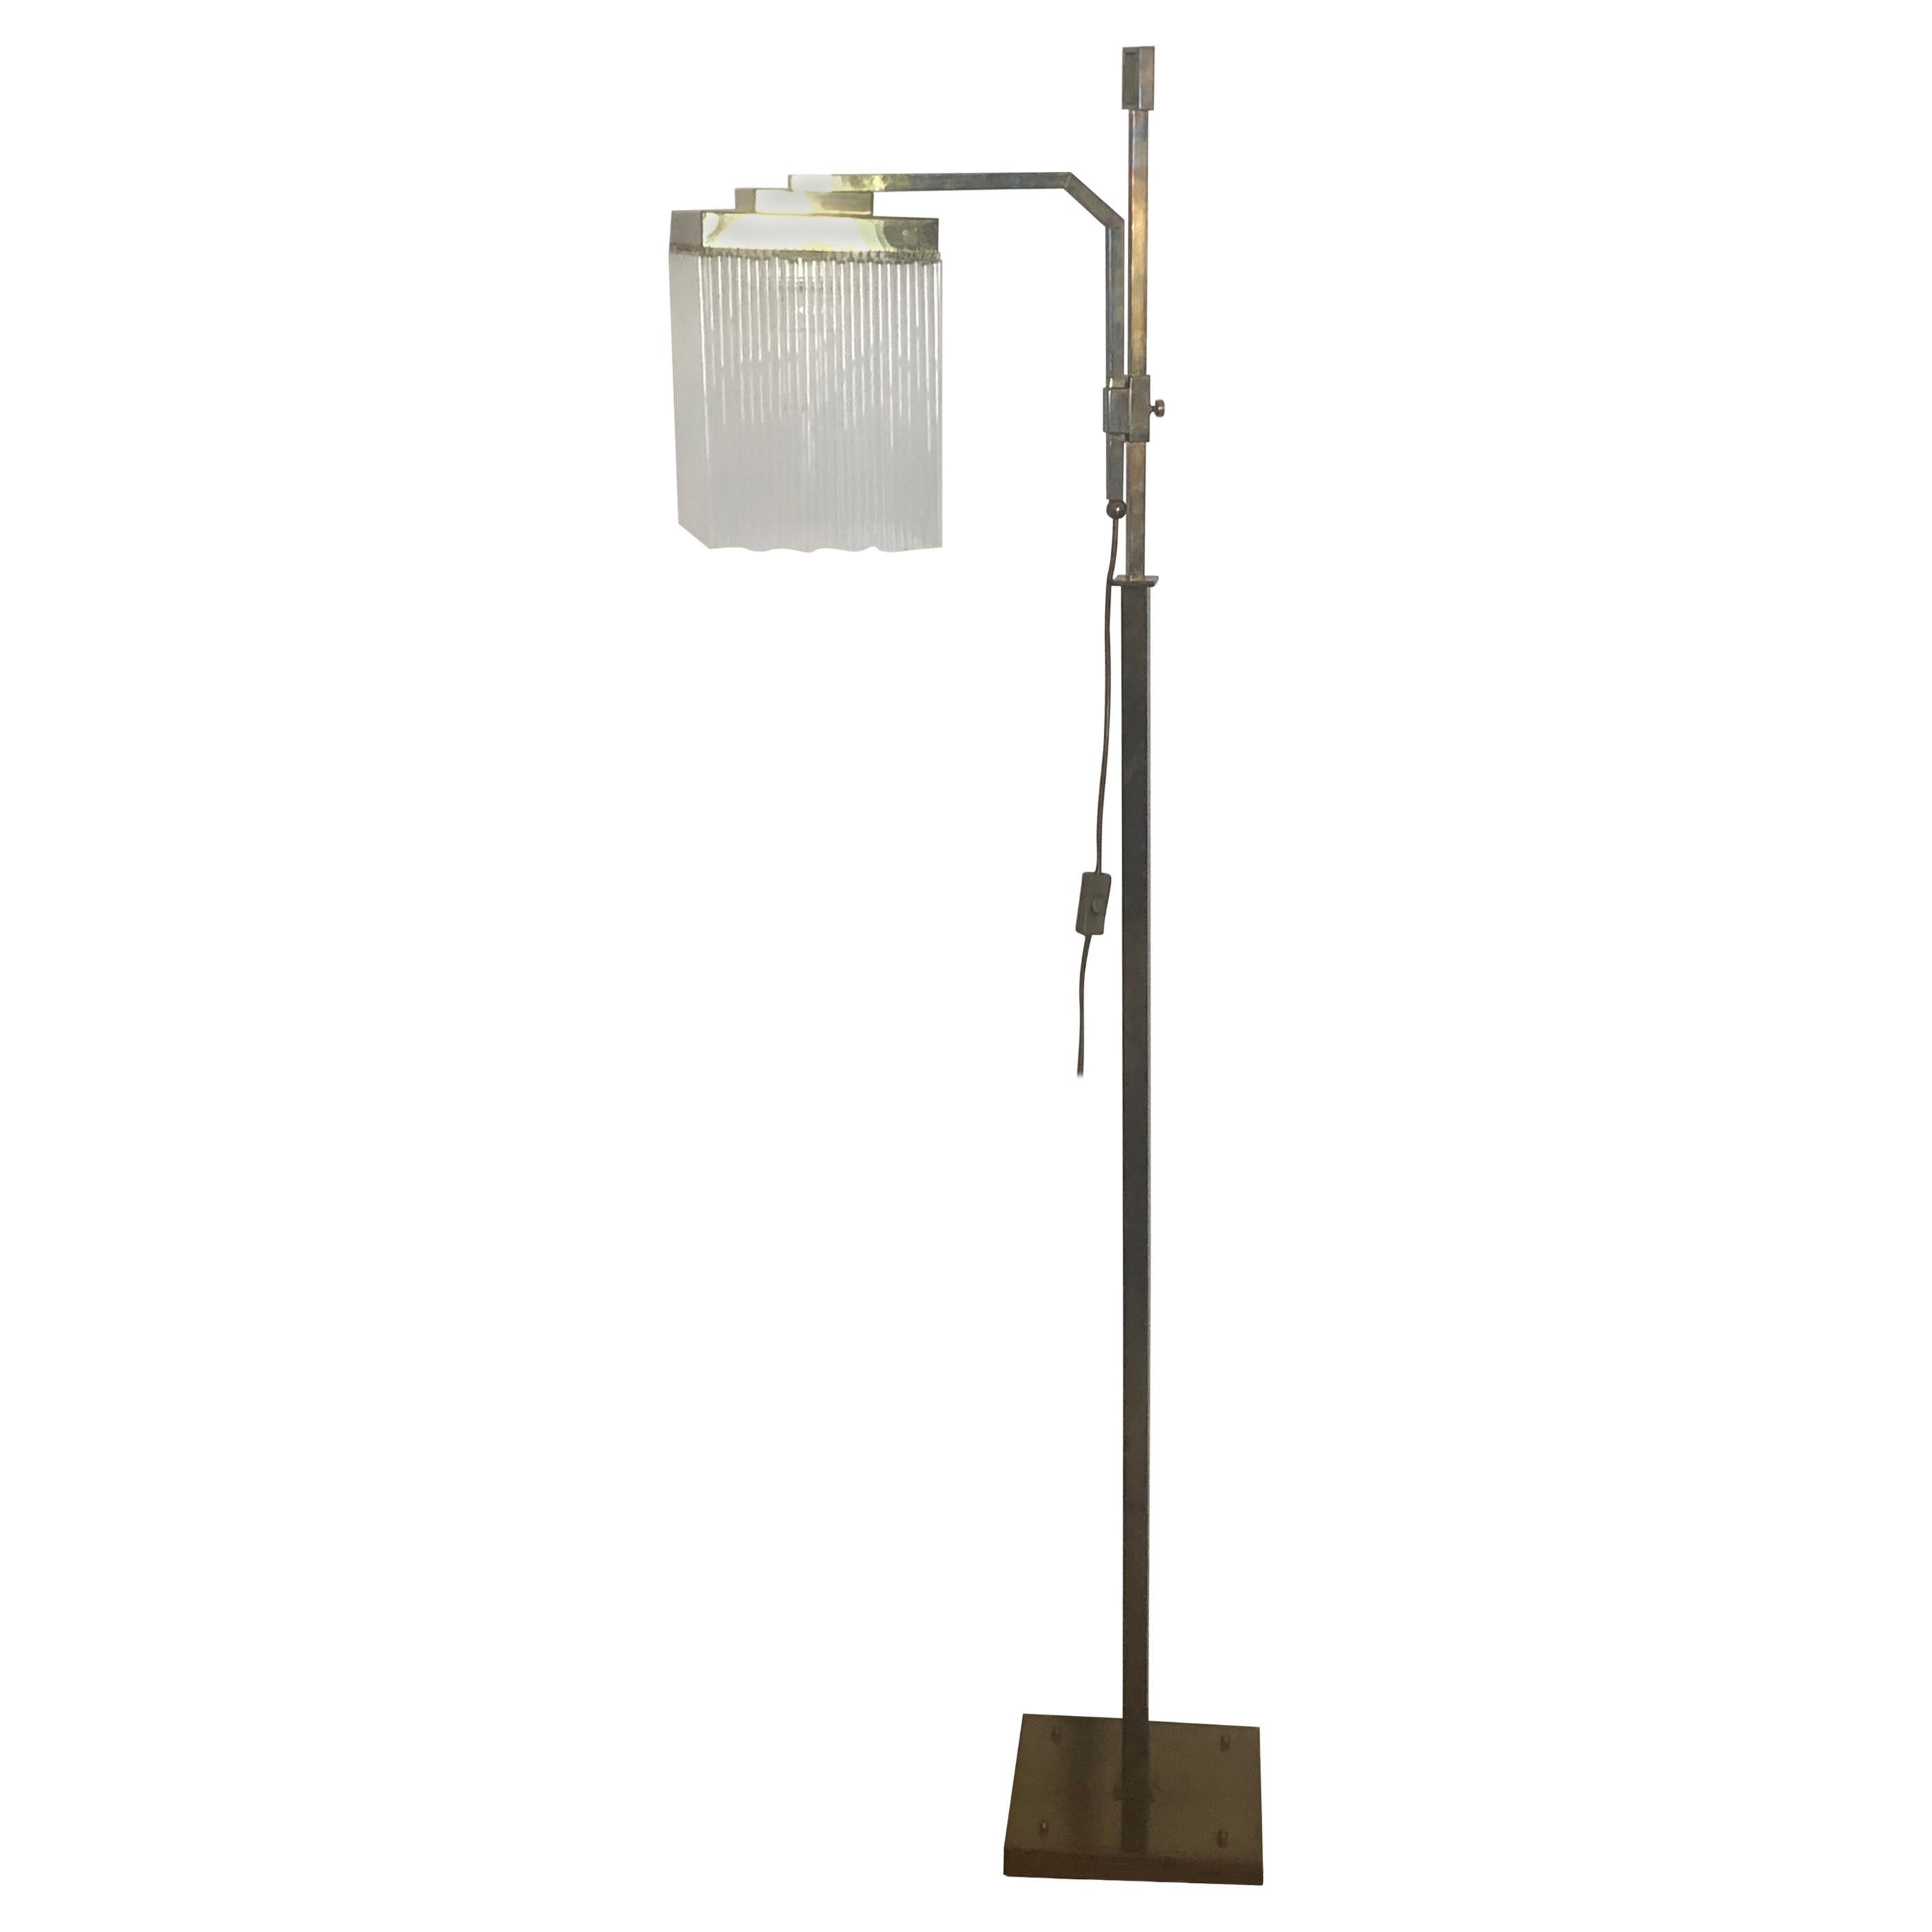 Rare Brass and Glass Floor Lamp From Vienna, Koloman Moser, Otto Wagner Style